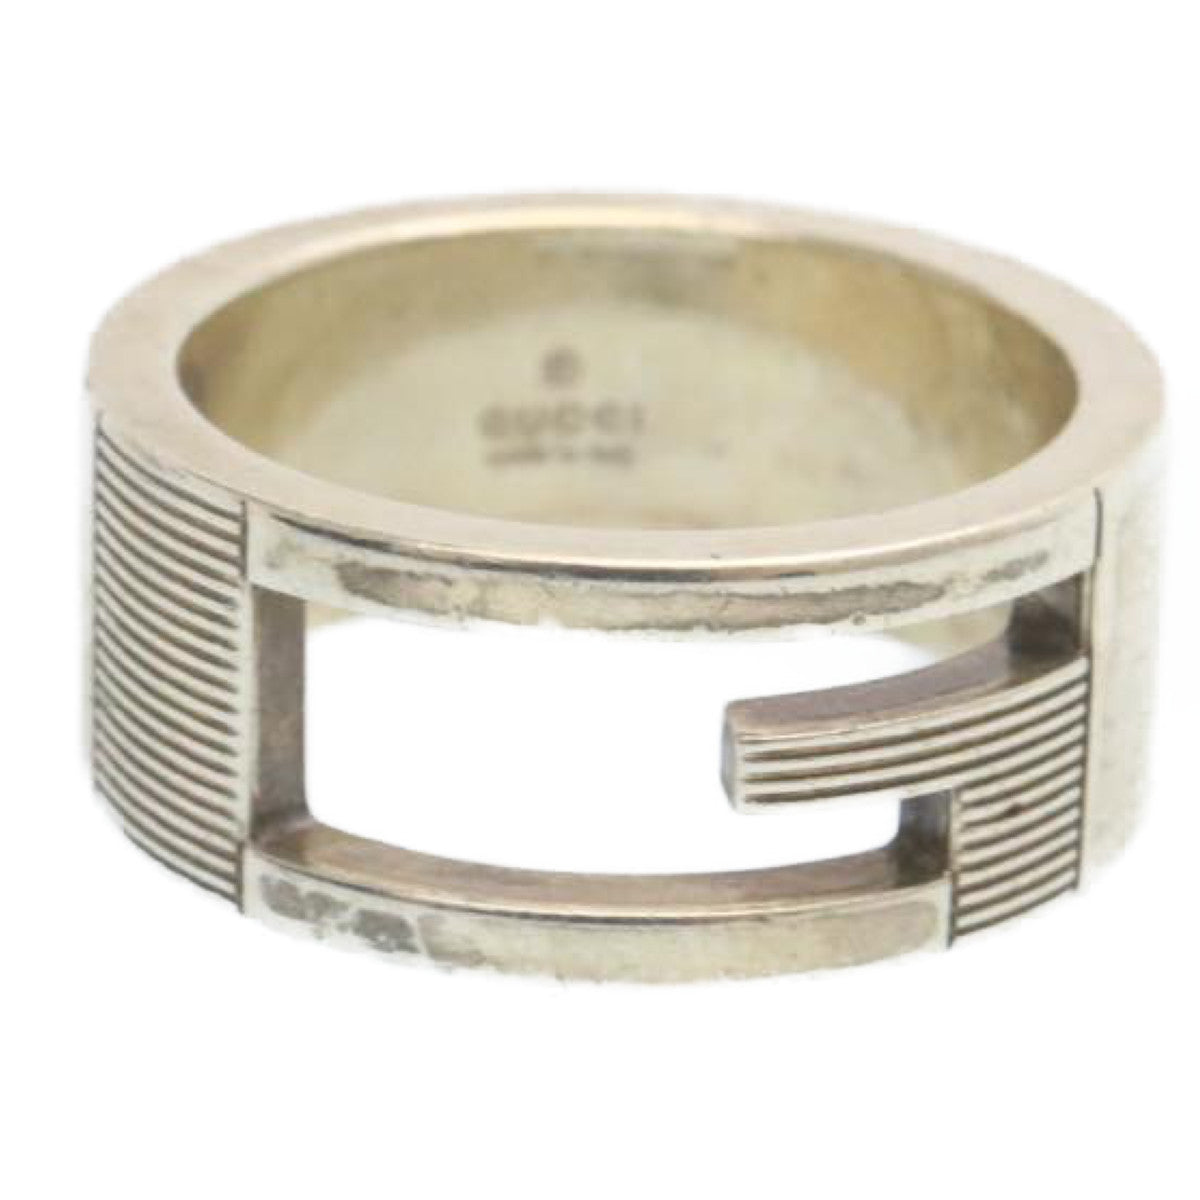 GUCCI Ring 2 Set size 7 and 16 Silver Auth am2085g - 0